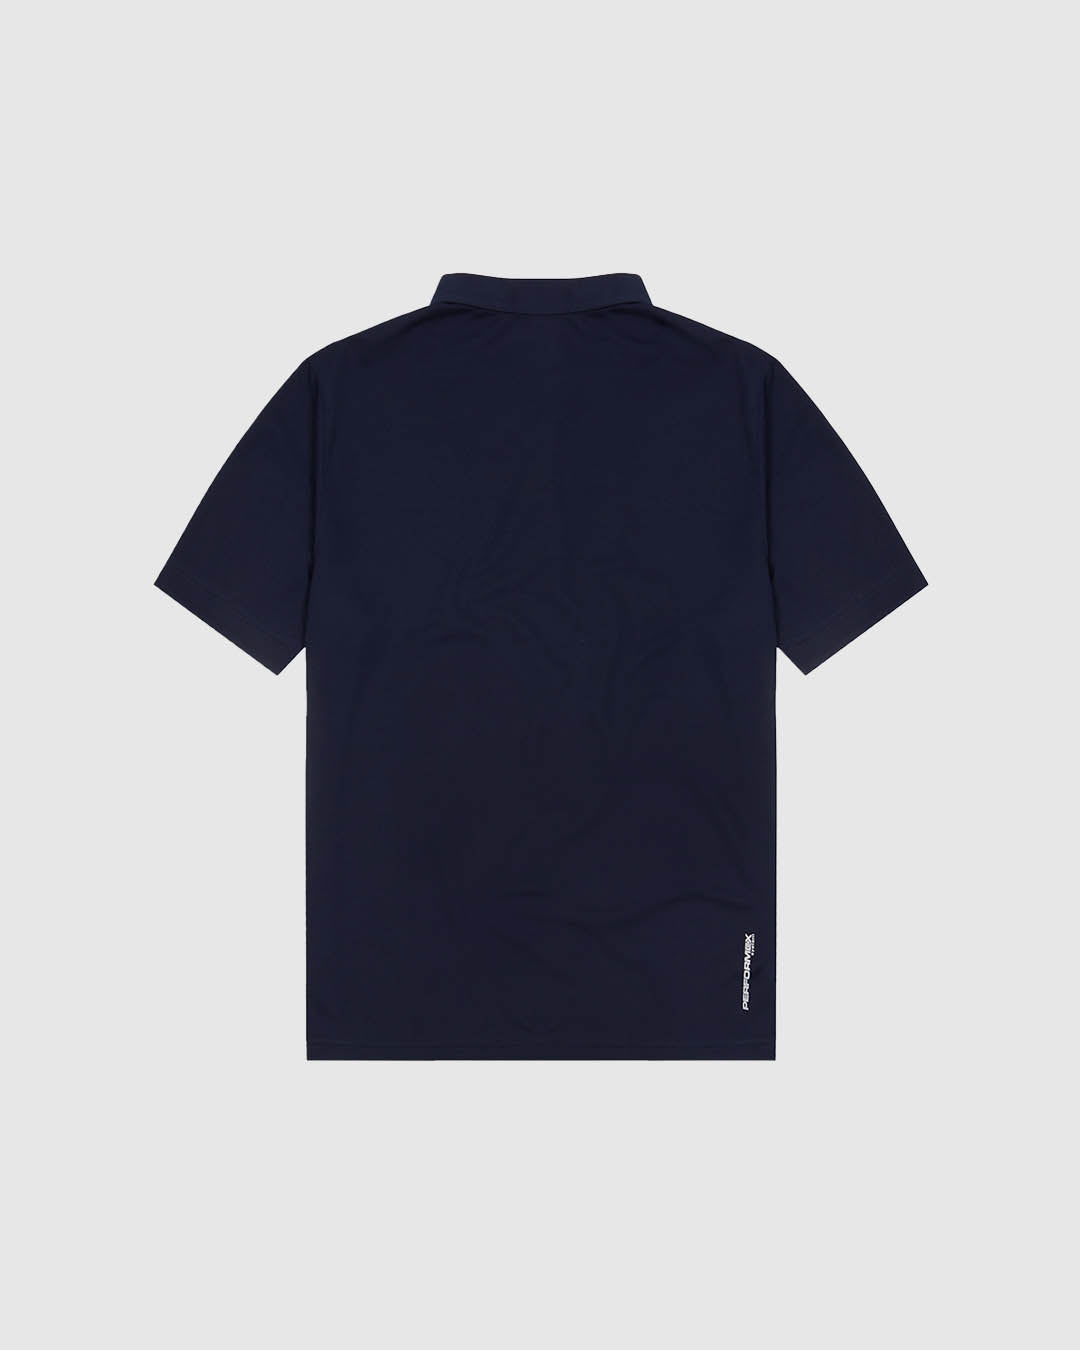 Derbyshire CCC - EP:0111 - Performance Polo 2.1 - Navy